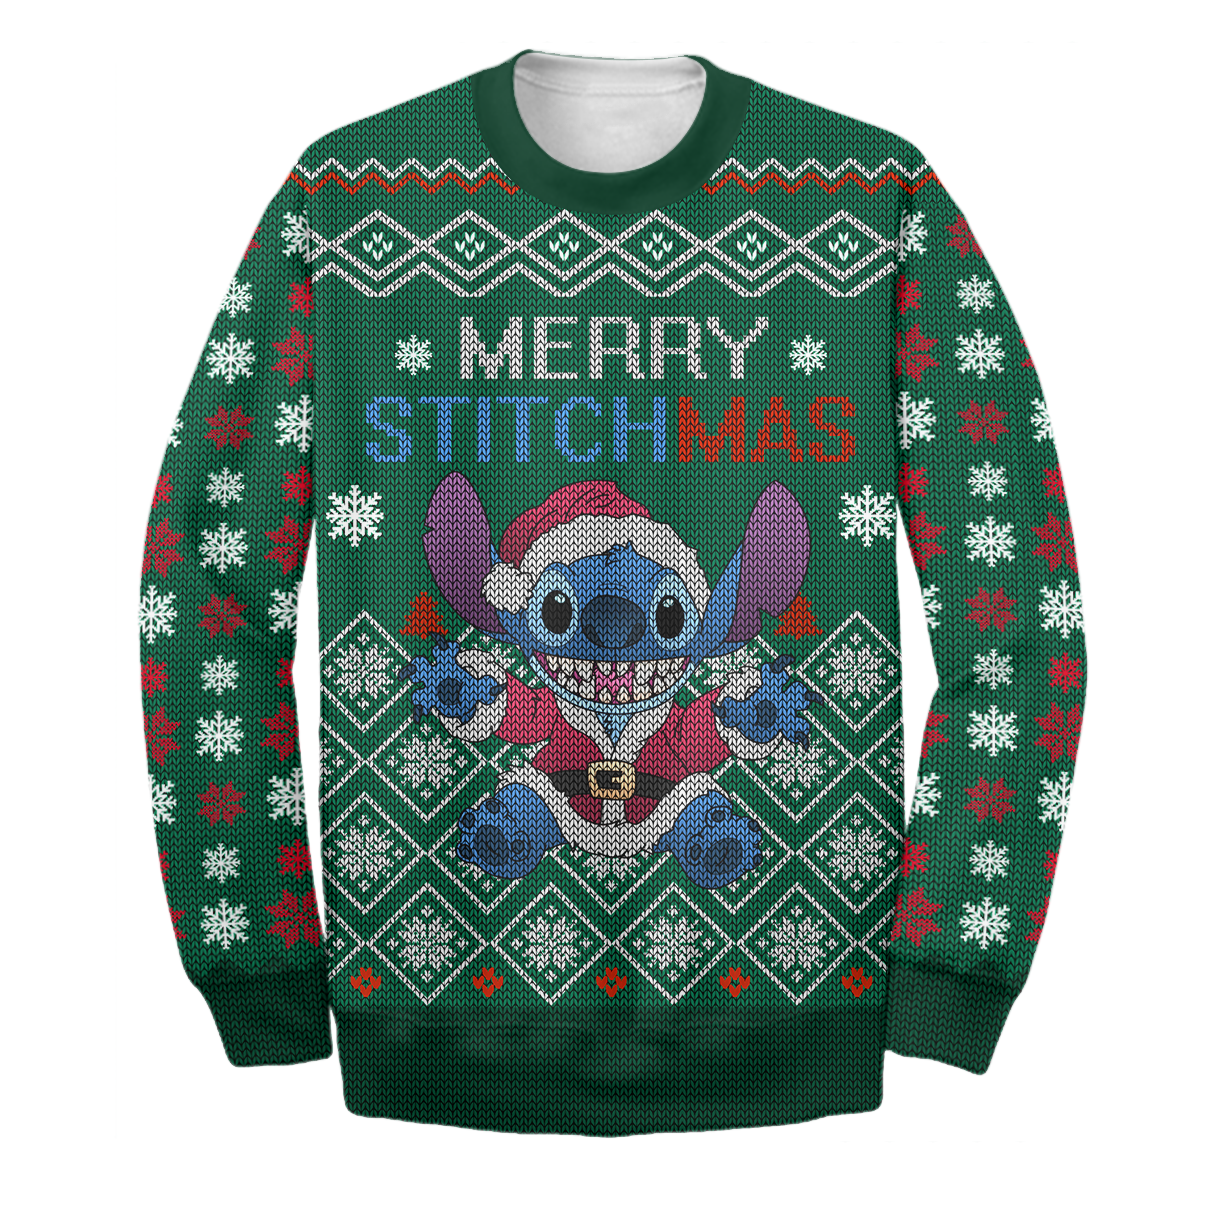 Unifinz Stitch DN Sweater Ugly Long Sleeve - Merry STITCHMAS Printing Stitch DN Ugly Sweater 2022